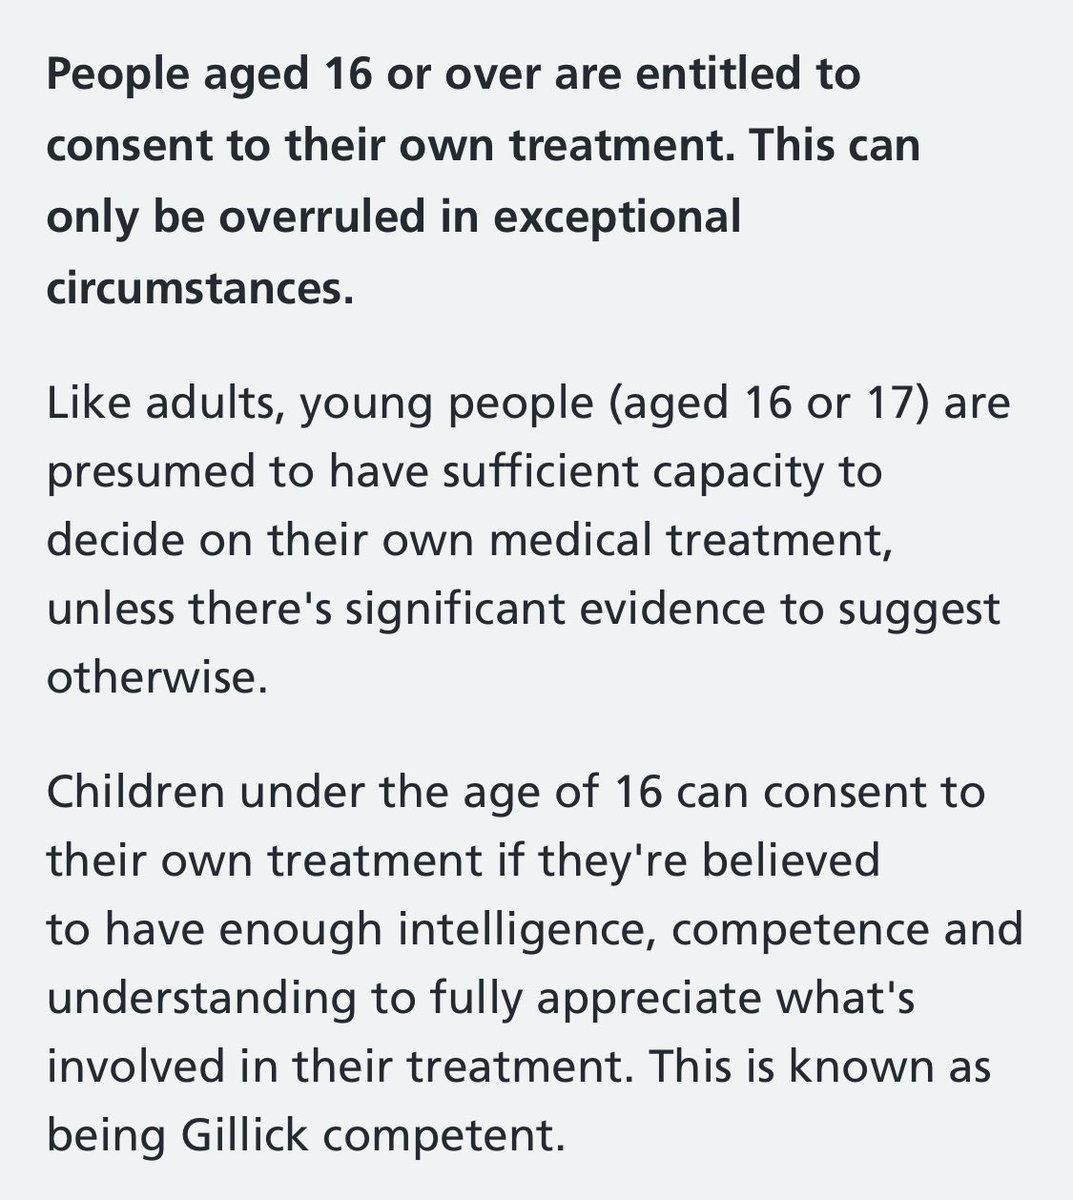 Kiera Bell was 16 when she was prescribed blockersAt 16, she’s considered competent to consent to medical treatment, which can “only be overruled in exceptional circumstances”Even if she’s successful in revoking Gillick for trans kids U16, it wouldn’t have applied to her!